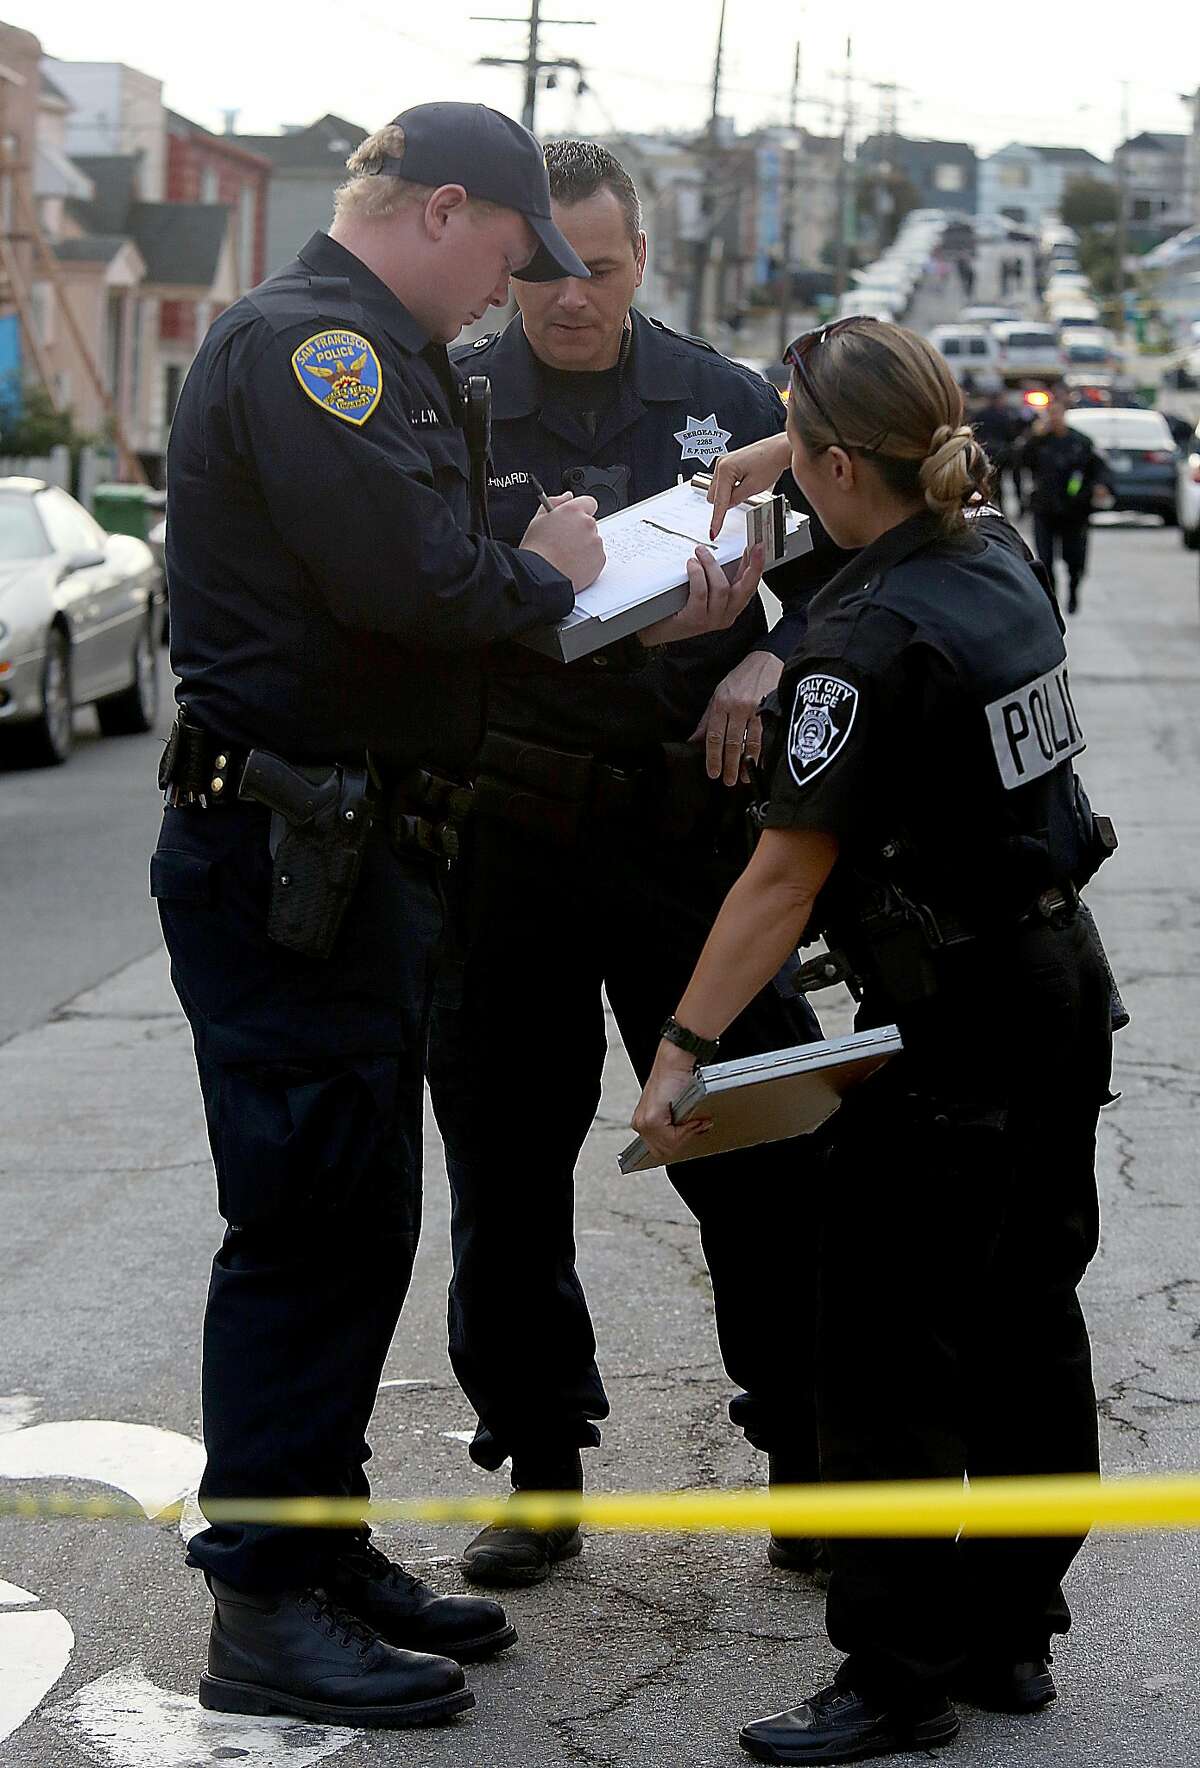 Police a block from the site of the officer involved shooting on the 200 block of Montana Street on Tuesday, Oct. 25, 2016 in San Francisco, Calif.